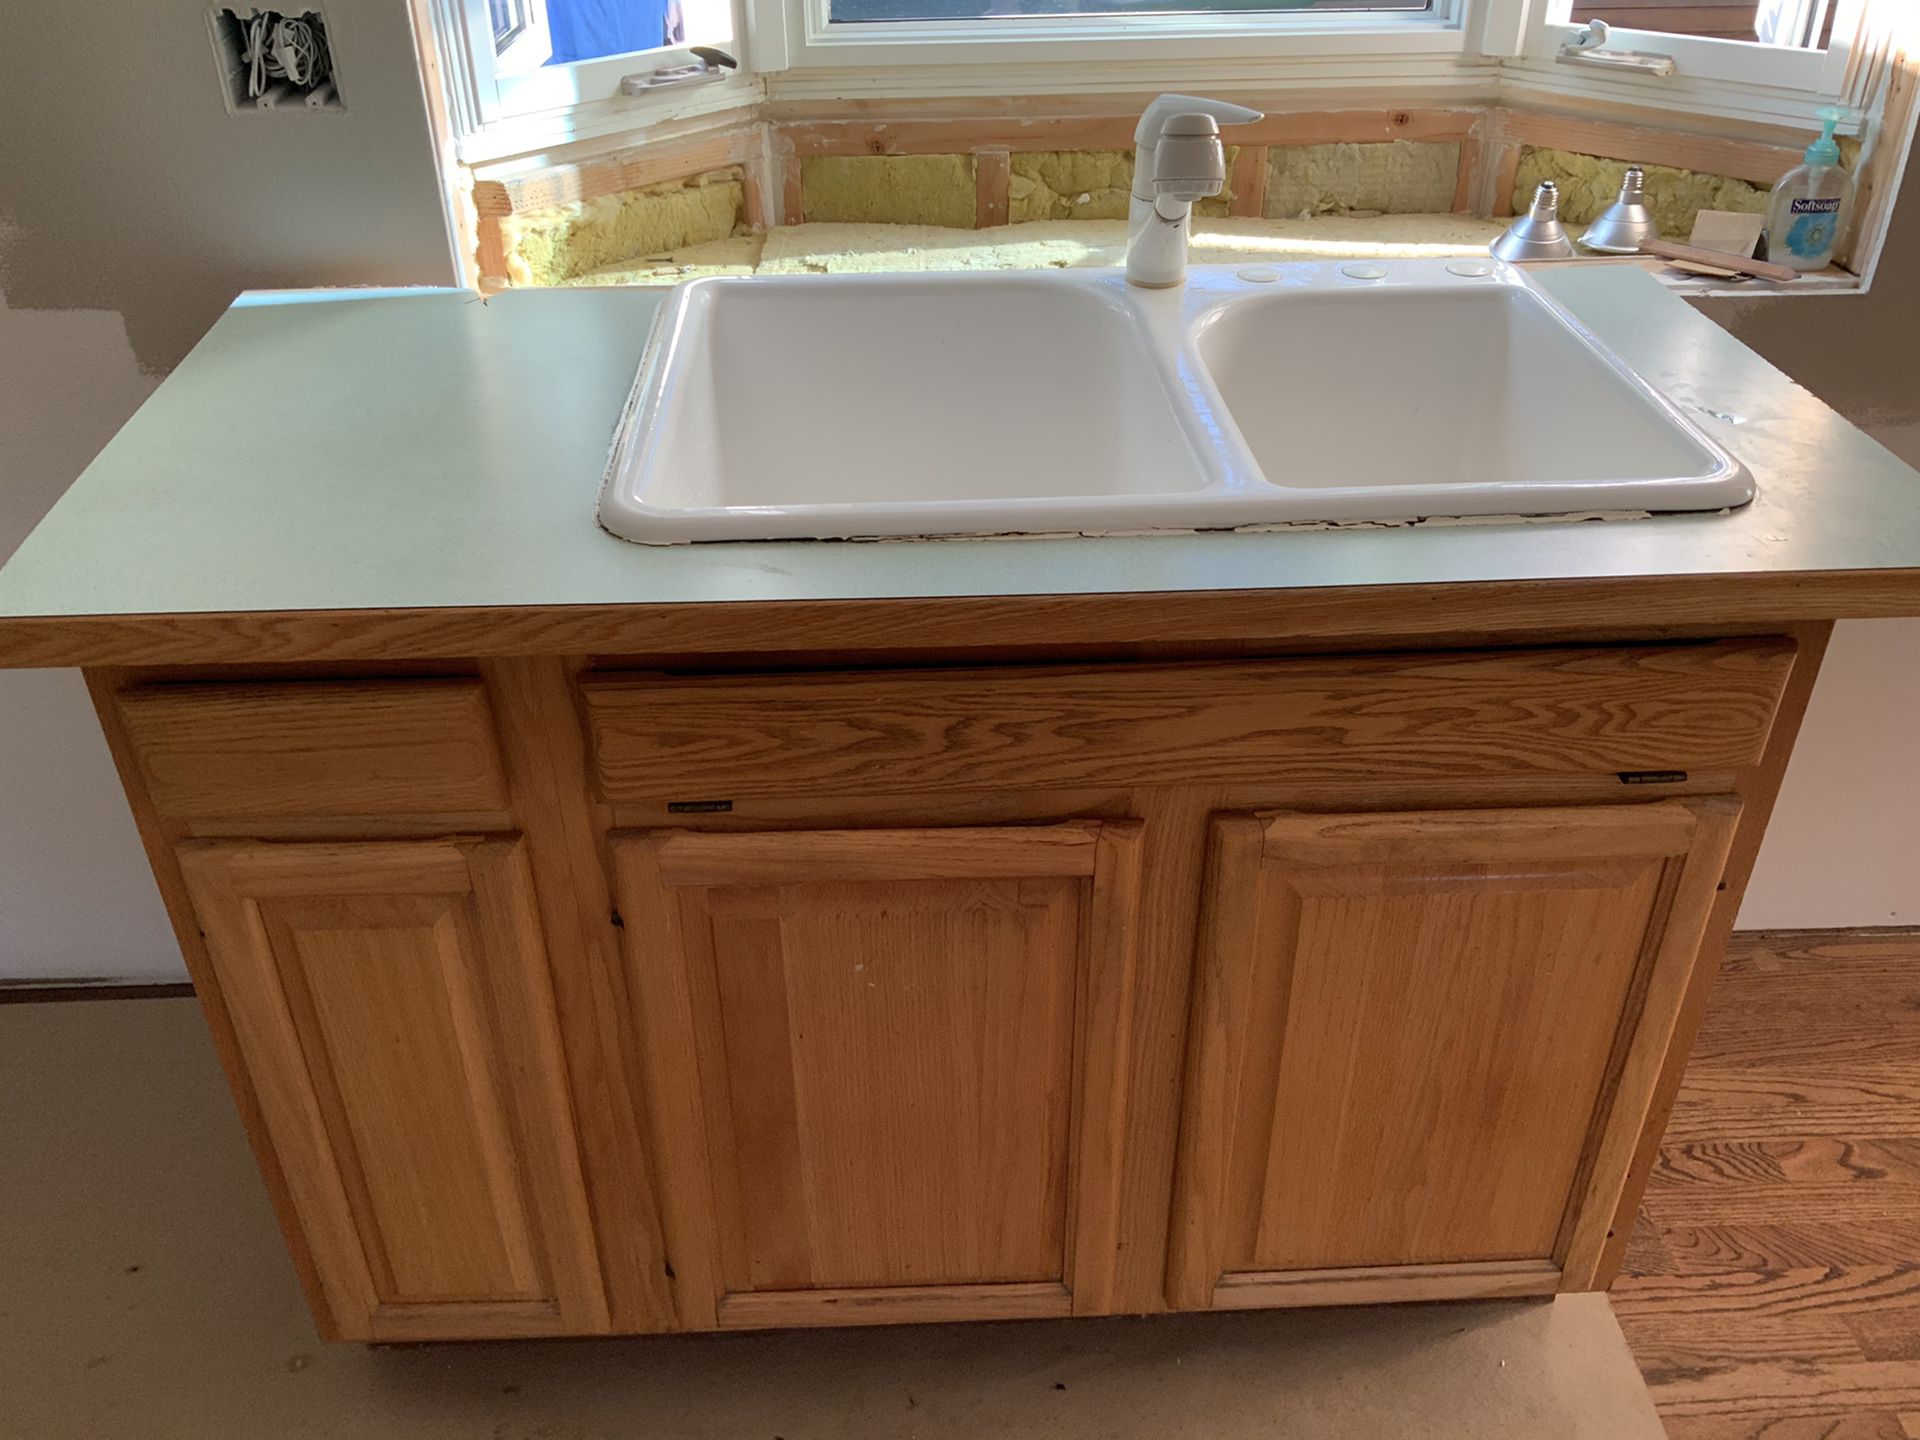 Kitchen sink, faucet, and cabinet